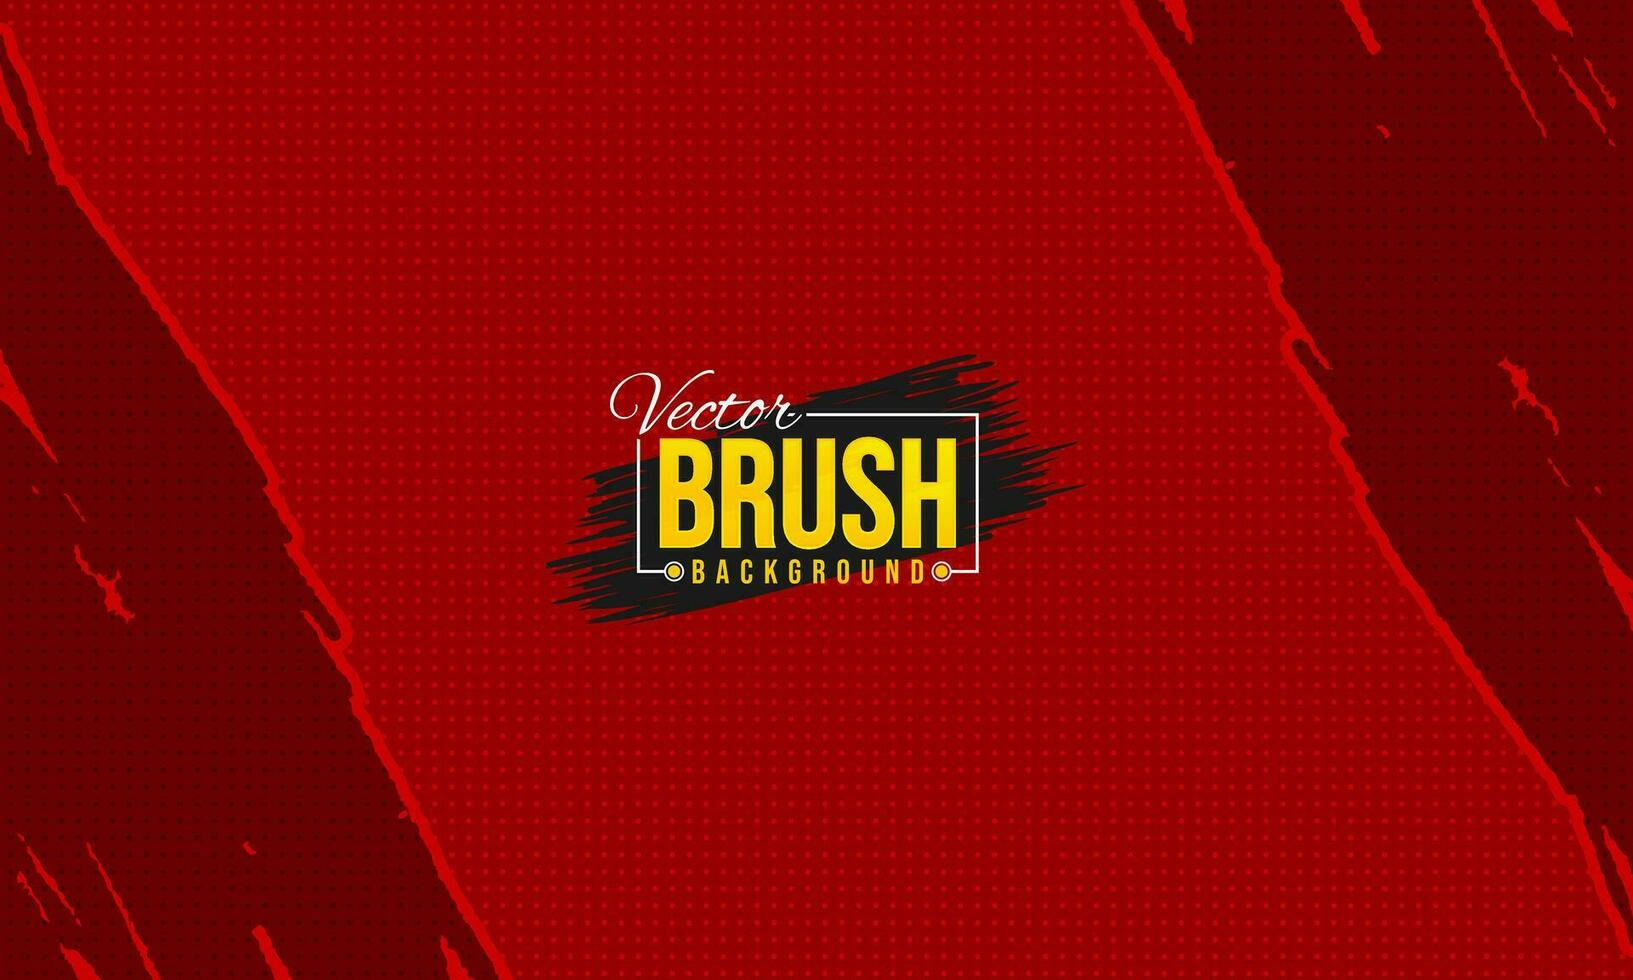 Dotted red with brush background vector